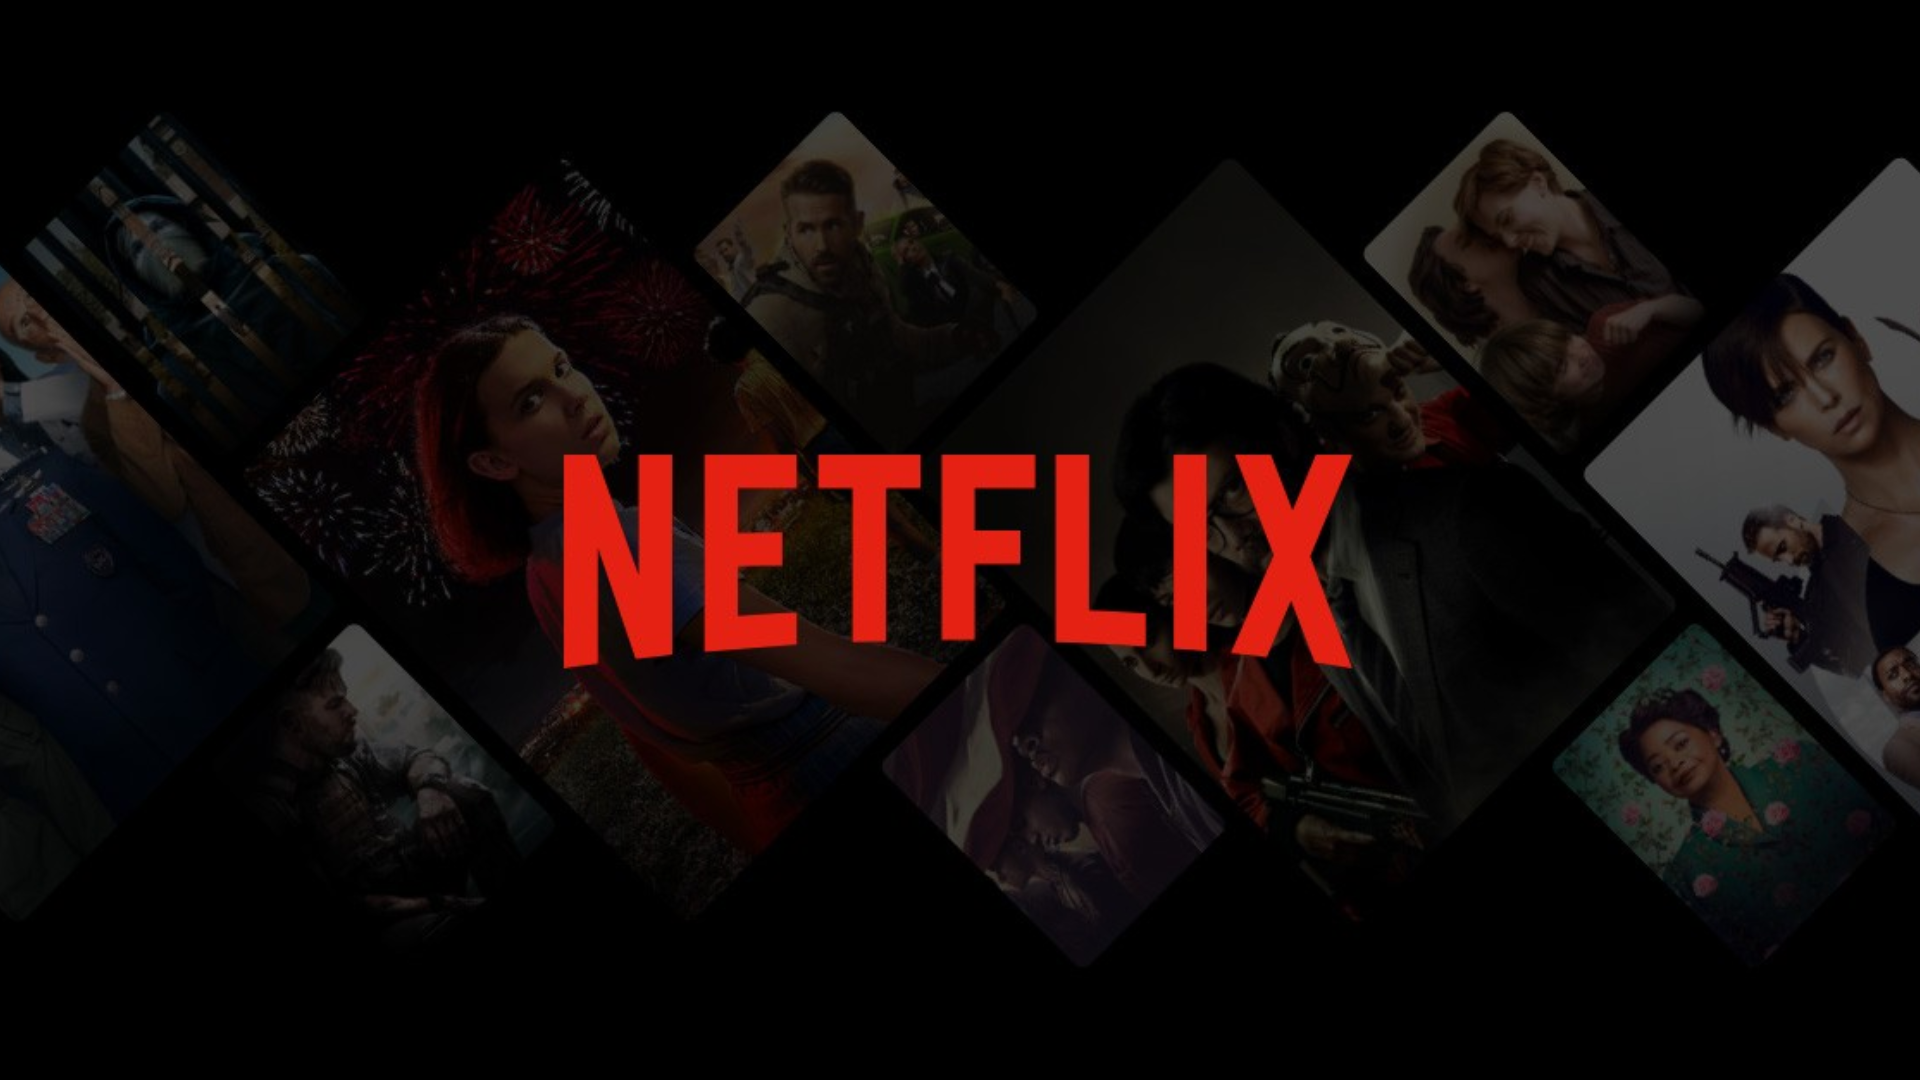 Netflix Is Being Summoned! NCPCR Calls Out Netflix For Allowing Minors To View Explicit Content